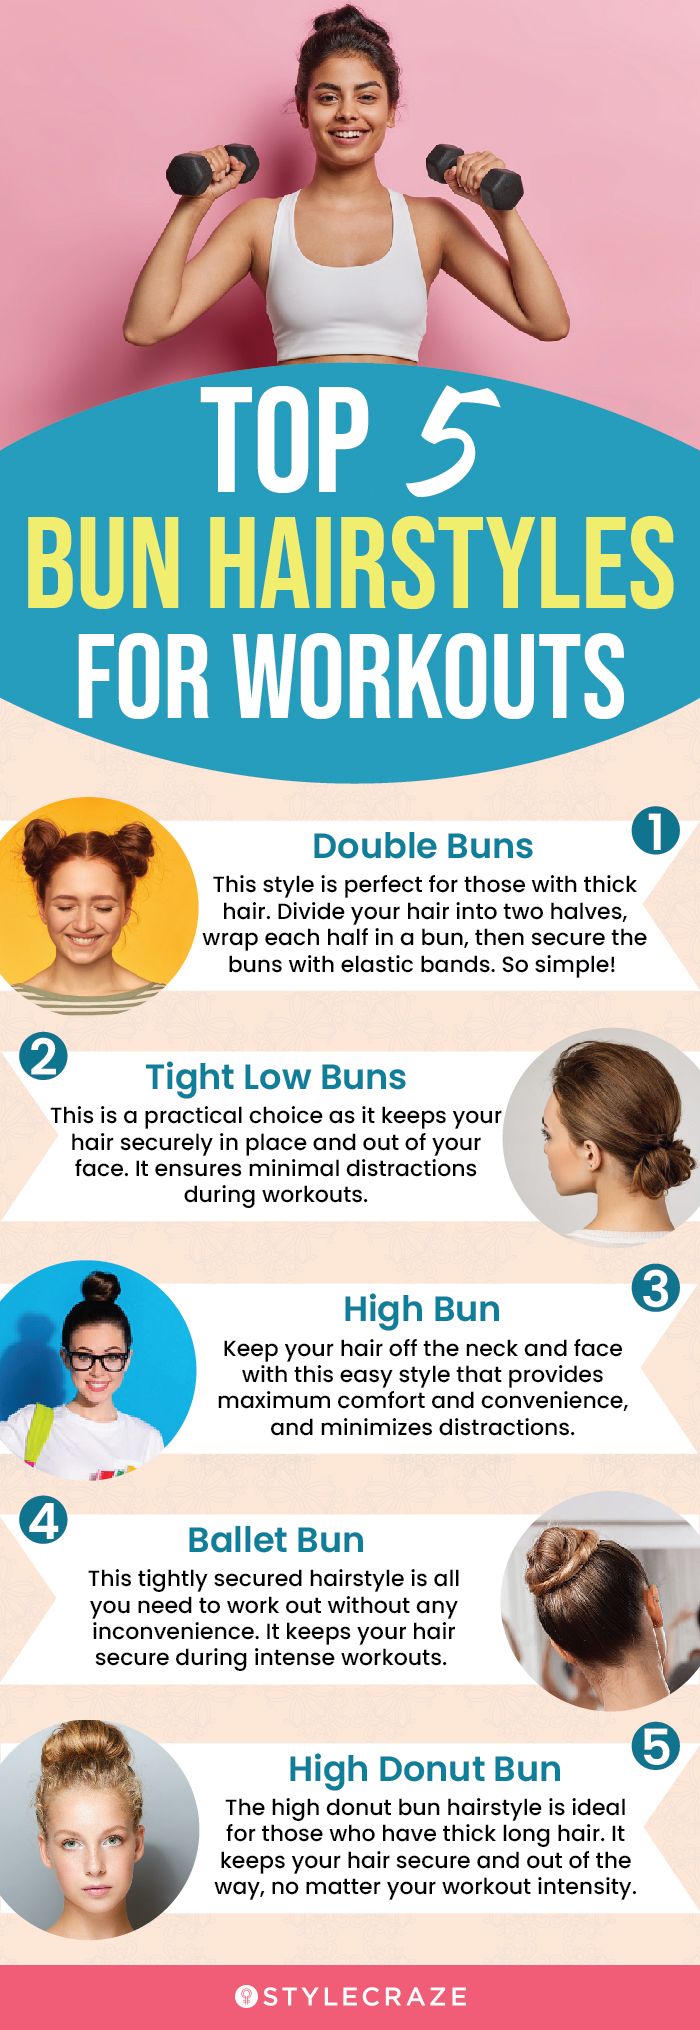 top 5 bun hairstyles for workouts (infographic)